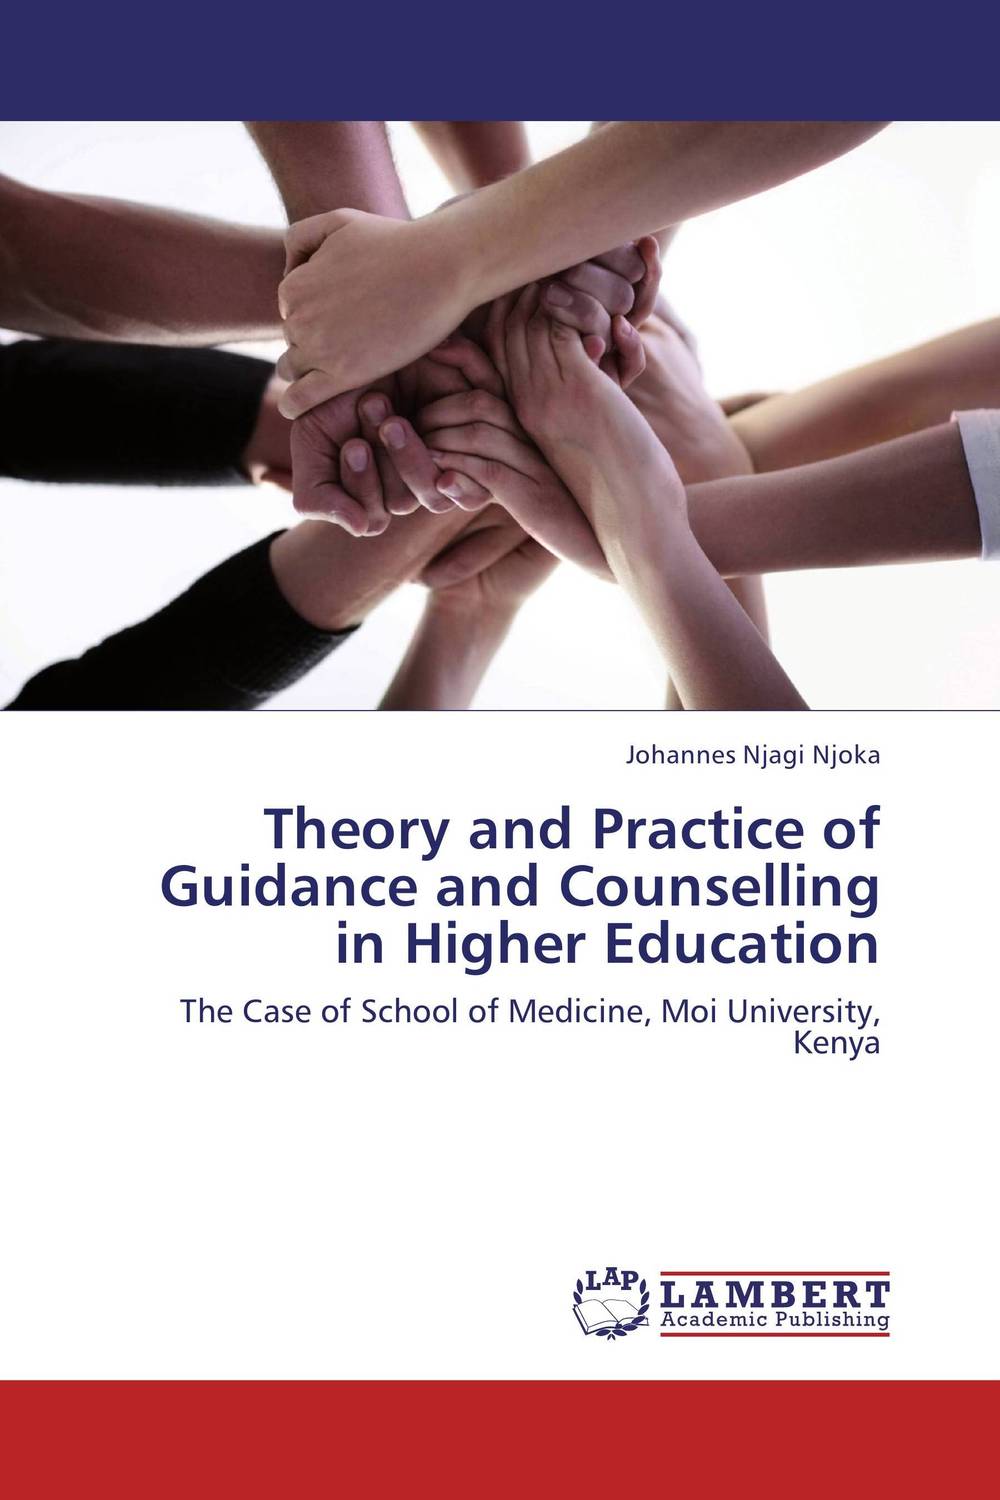 Theory and Practice of Guidance and Counselling in Higher Education